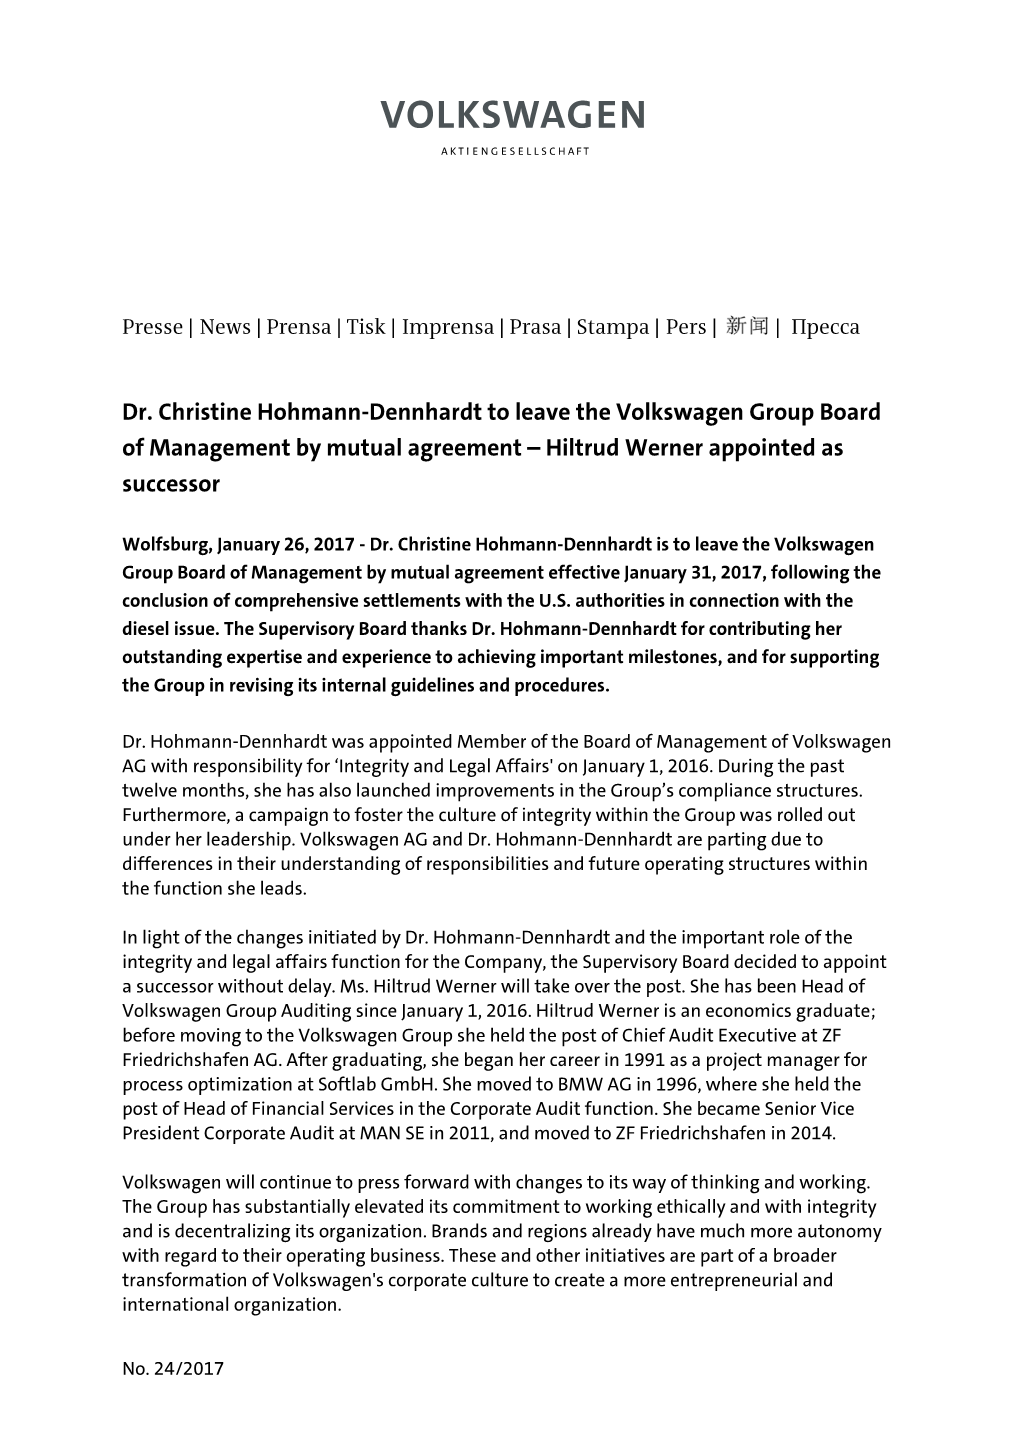 Dr. Christine Hohmann-Dennhardt to Leave the Volkswagen Group Board of Management by Mutual Agreement – Hiltrud Werner Appointed As Successor